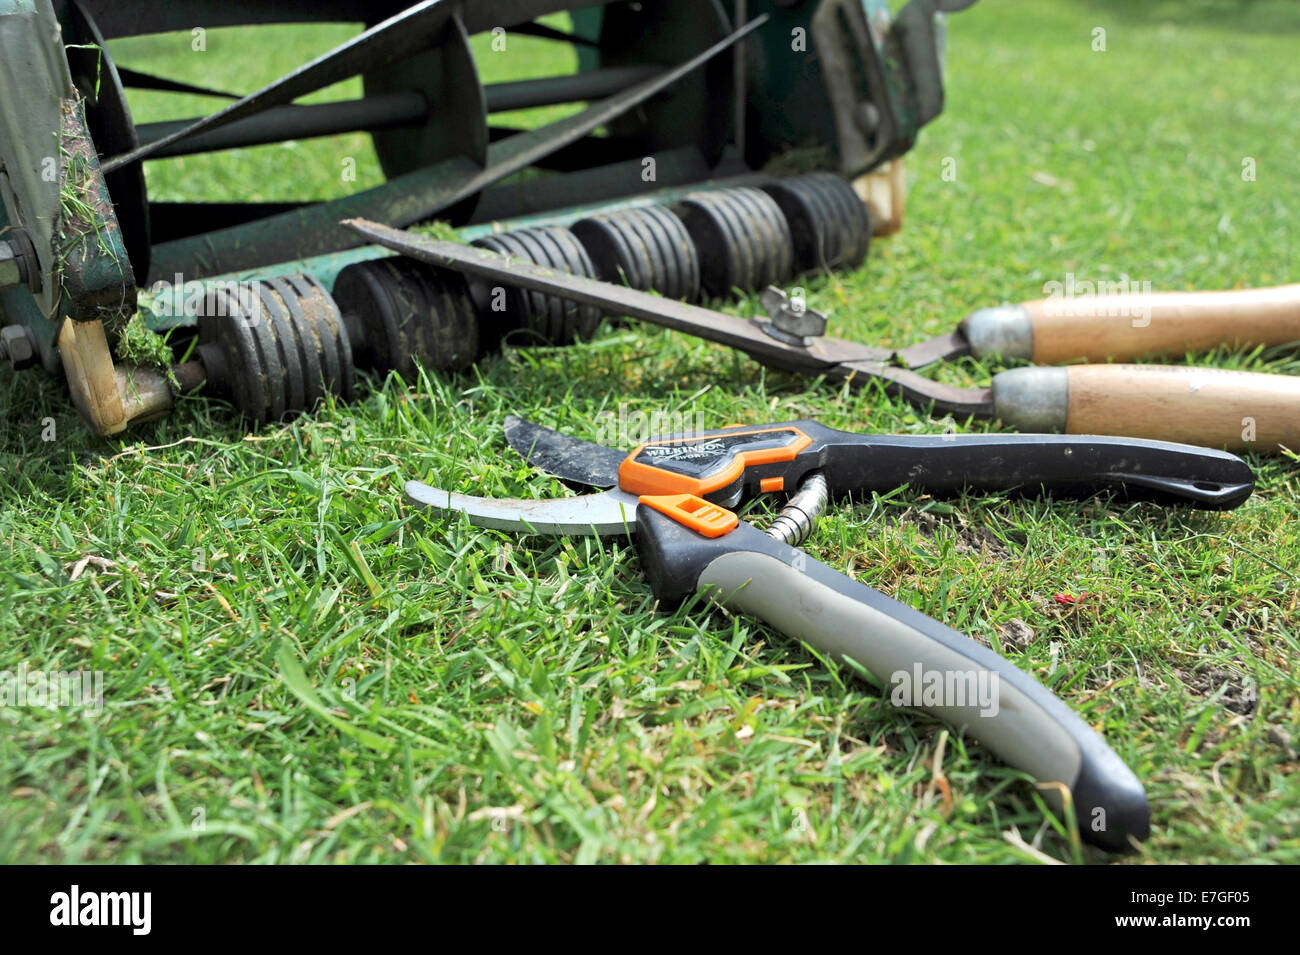 Garden pruning shears manual lawnmower and hand hedge trimmers Stock Photo